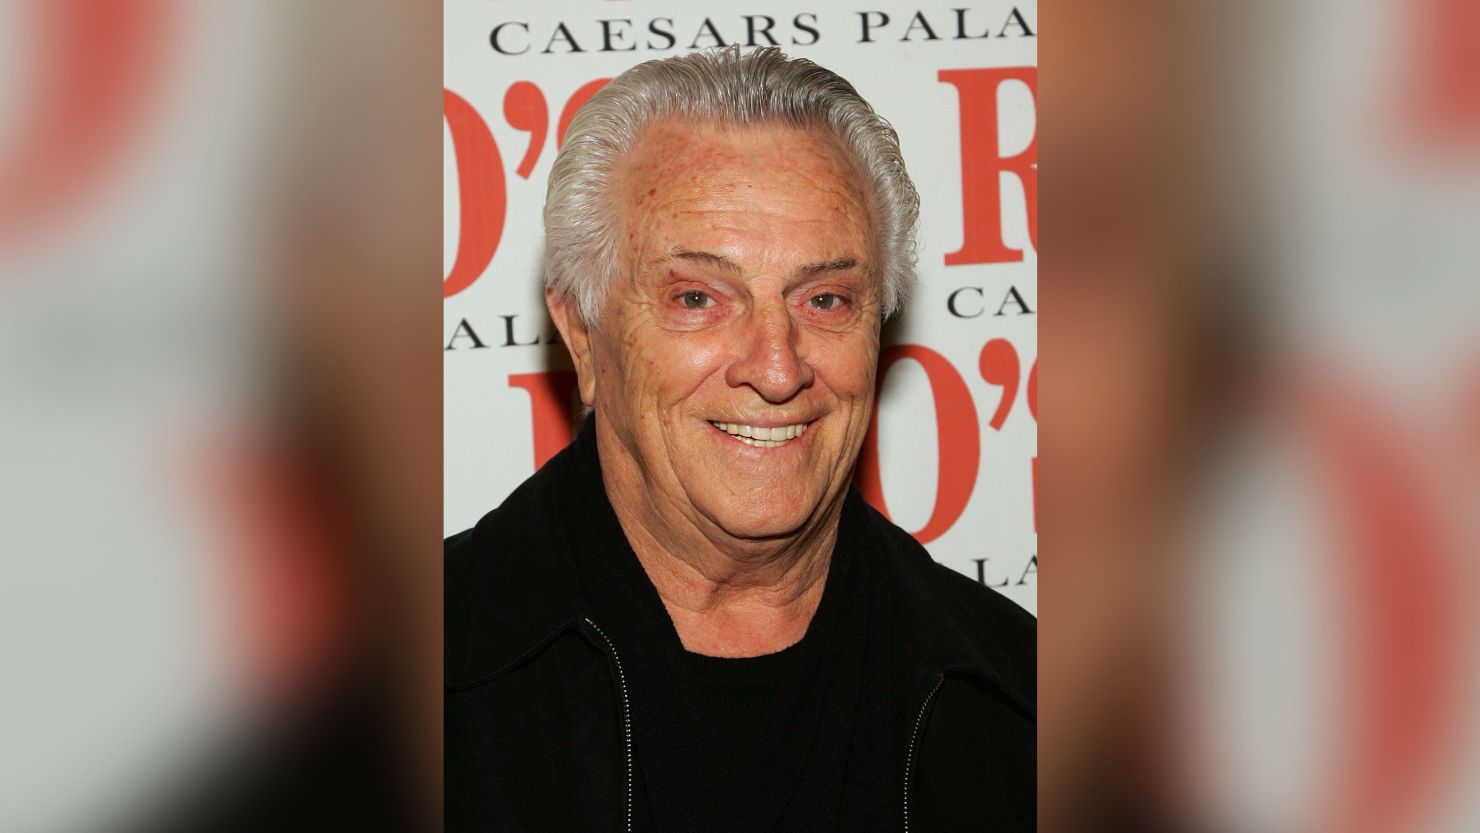 Tommy DeVito was a guitarist and original member of The Four Seasons.